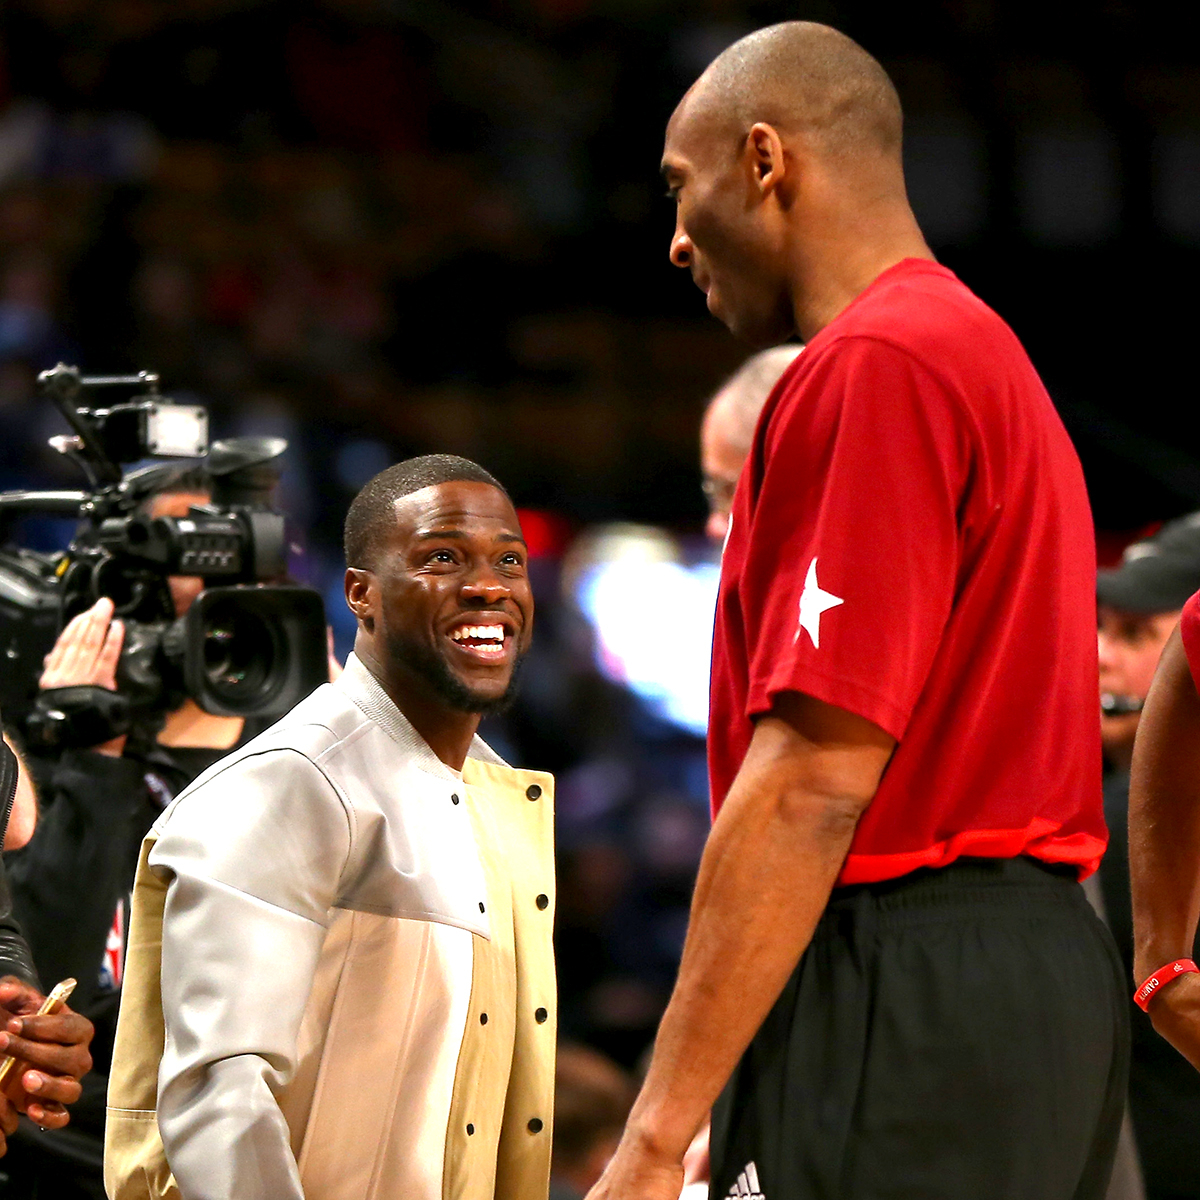 Kevin Hart Recalls Life-Changing Basketball Camp Days With Kobe Bryant